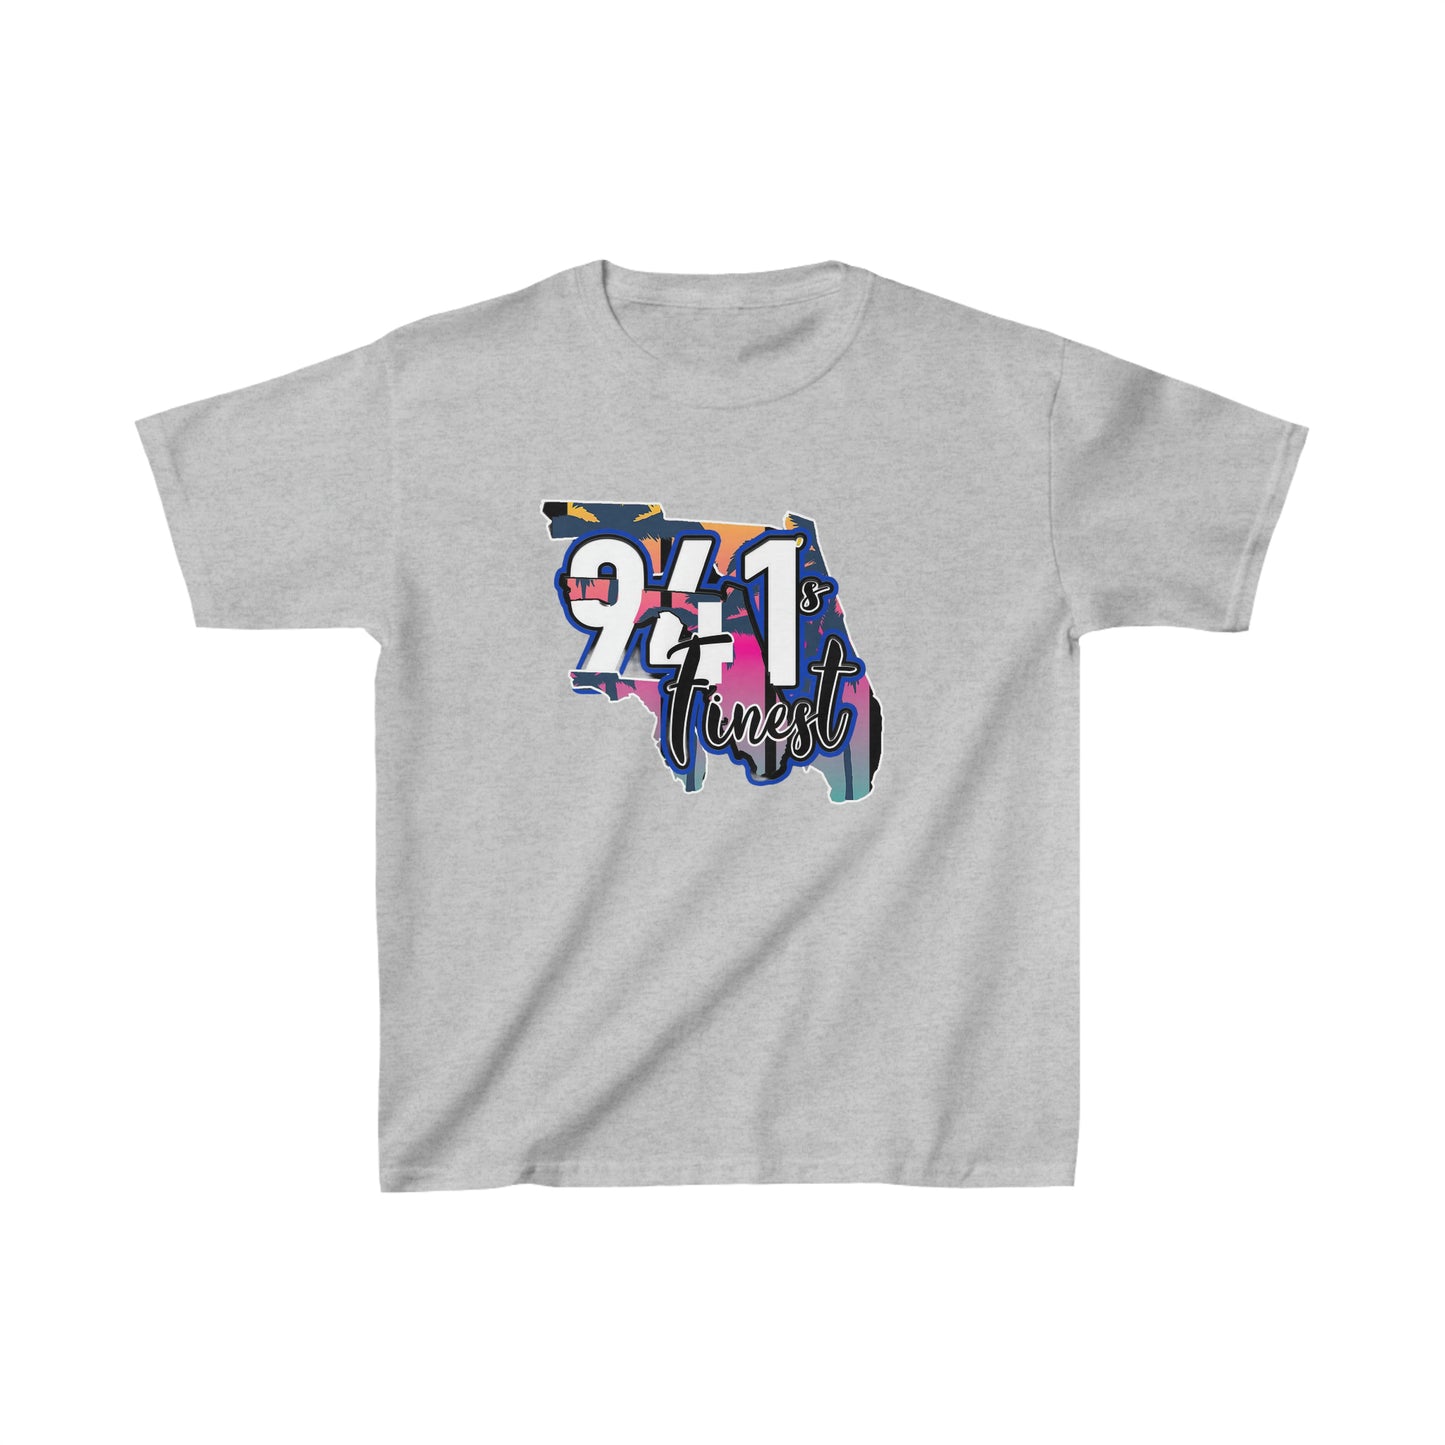 941s Finest Youth Tee